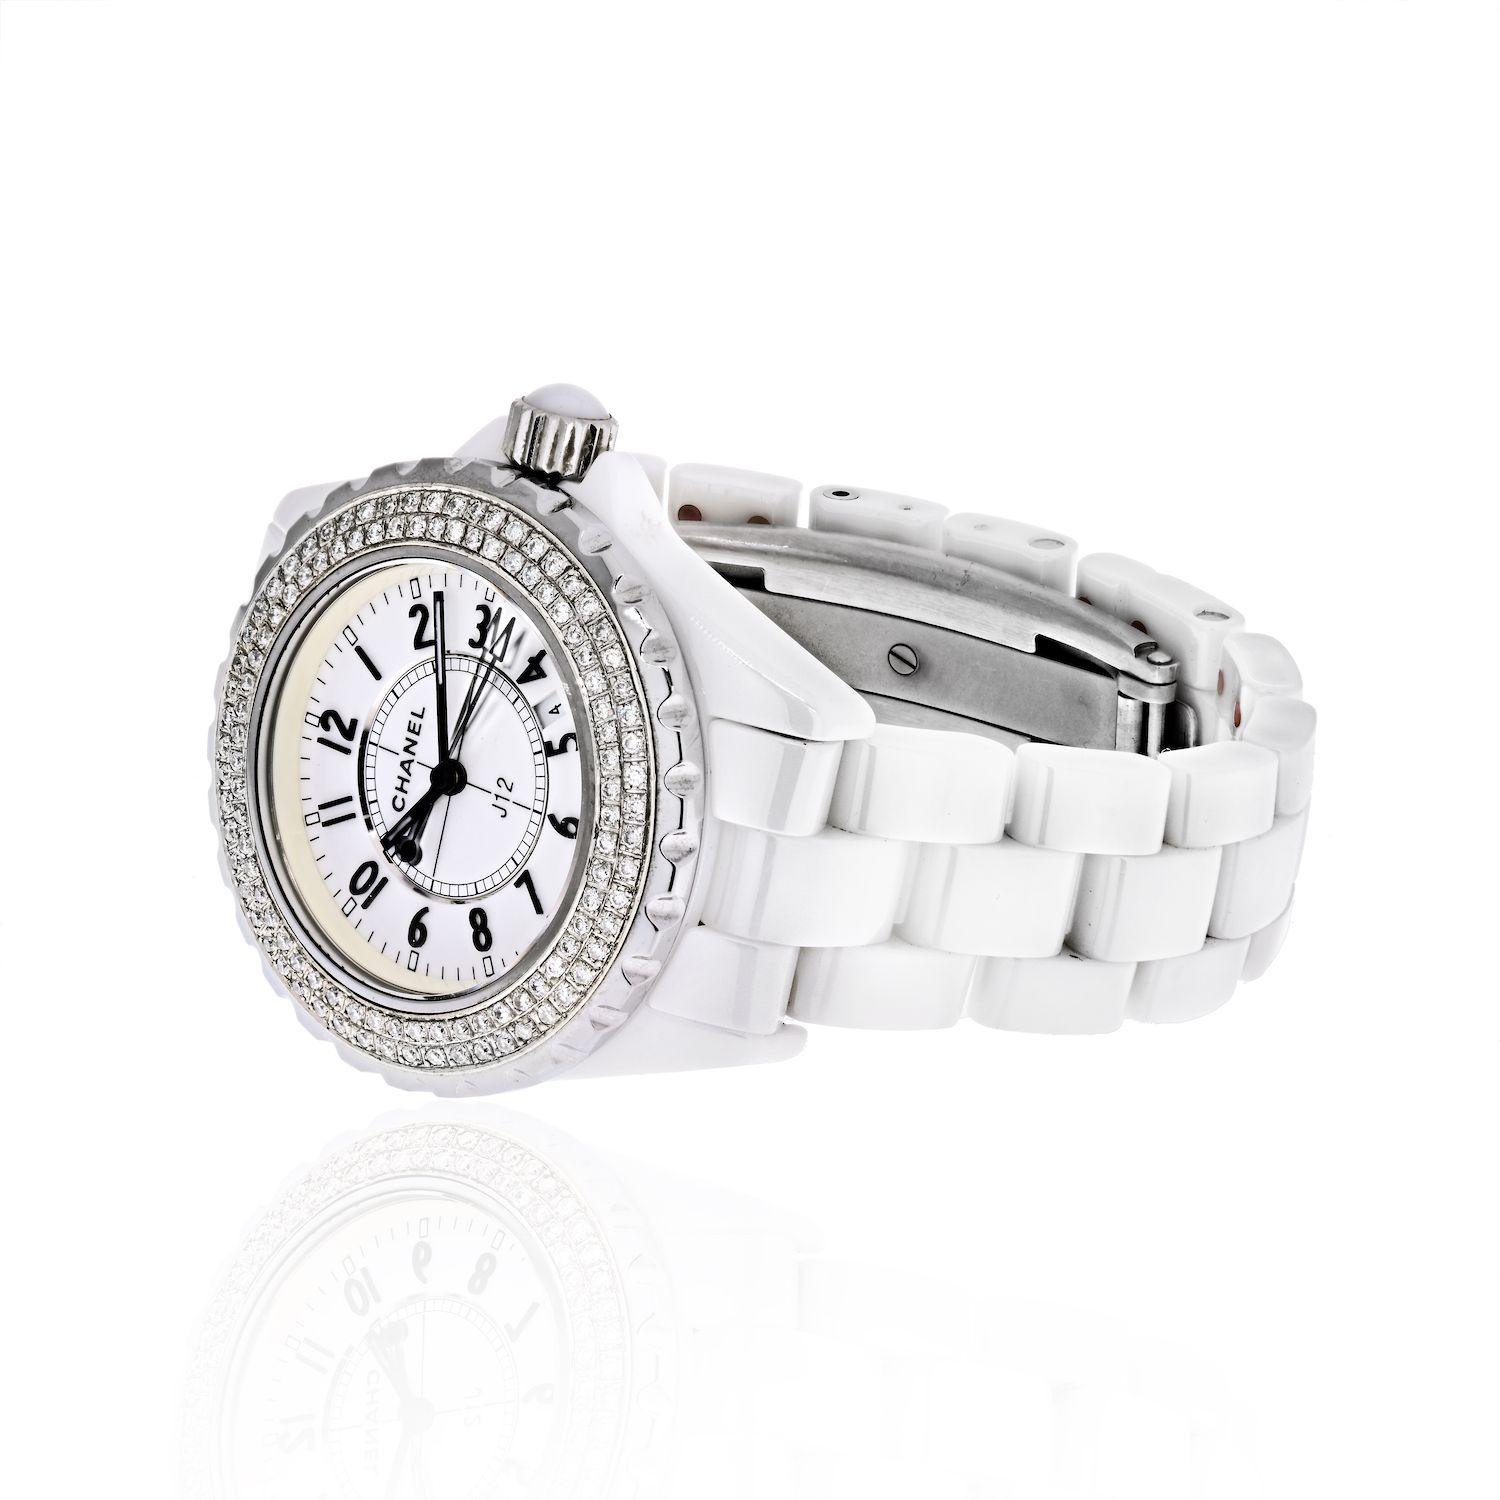 CHANEL Ceramic Stainless Steel Diamond 38mm J12 Quartz Watch White. This stunning watch is beautifully crafted of white high-tech ceramic and stainless steel. Features also include a beautiful rotating bezel trimmed with diamonds with a total